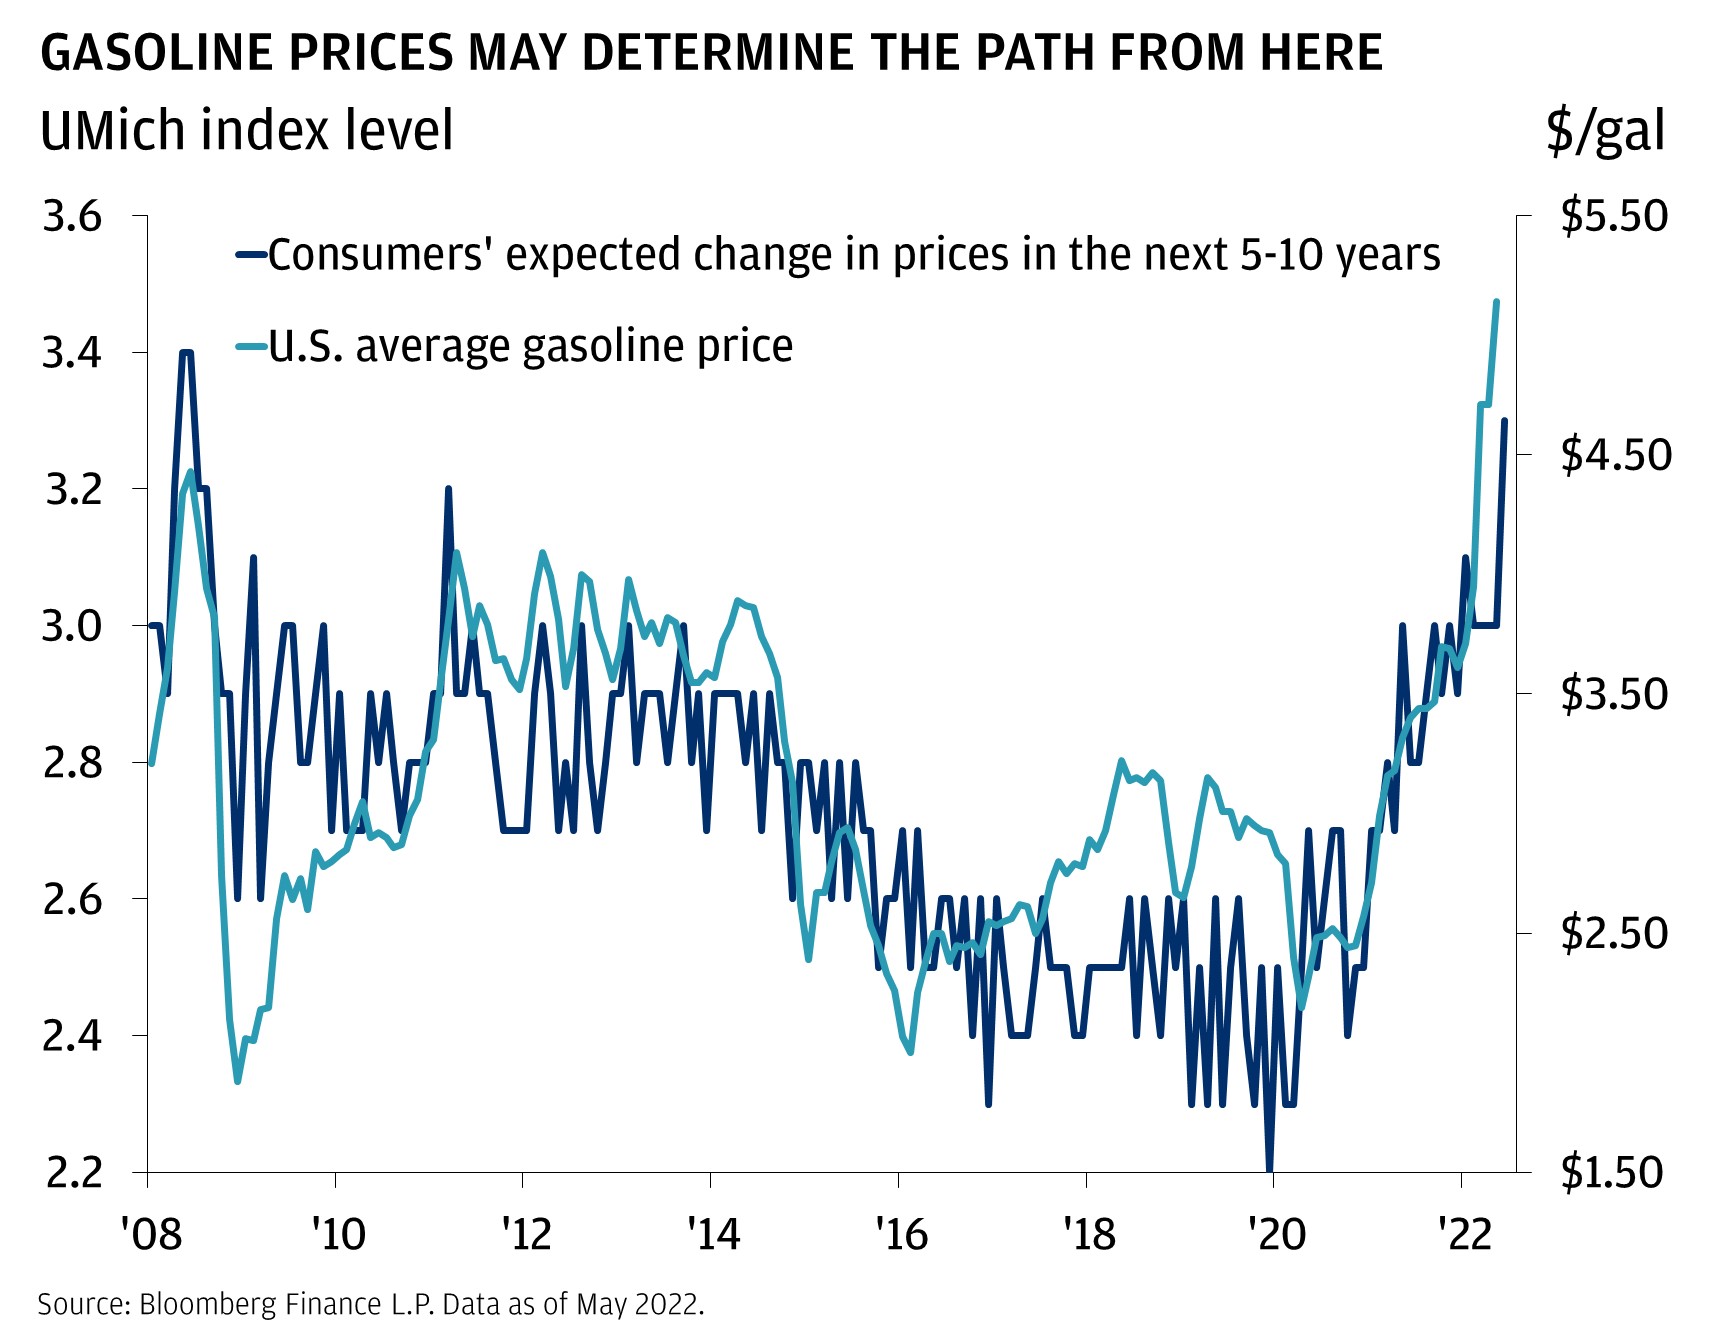 This chart shows the University of Michigan Index of Consumer Expectations for prices in the next 5-10 years (using the 3-month moving average data points to uncover the trend, since the data itself is volatile), and the U.S. average gasoline price from 2008 to 2022.